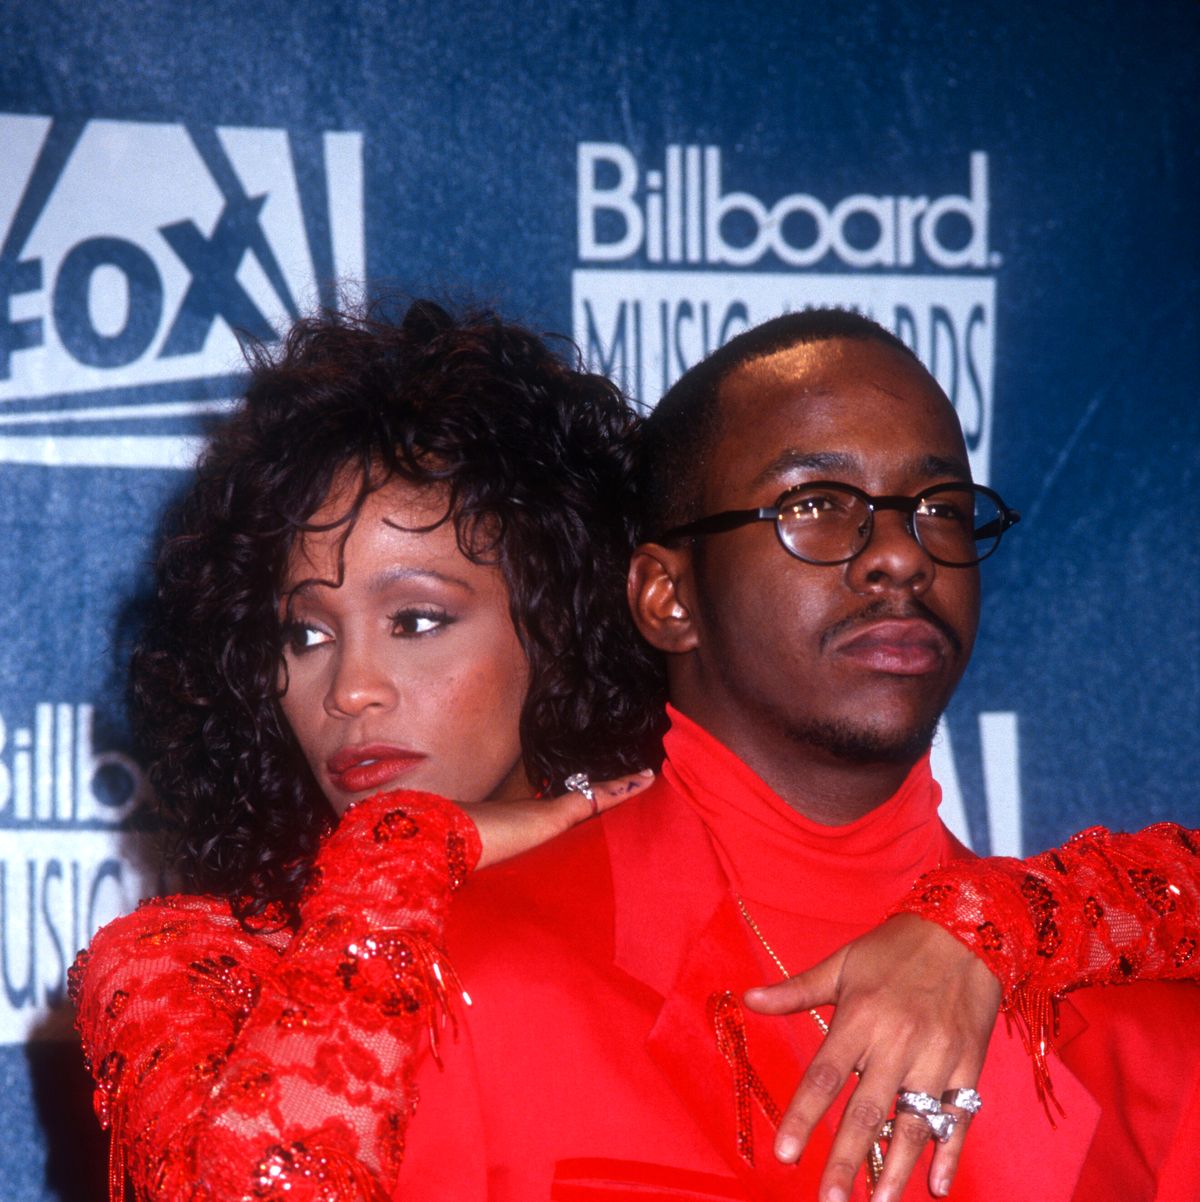 whitney houston and bobby brown pose for a photo, she hugs him from behind with her arms on his shoulders and chest, they wear matching bright red outfits